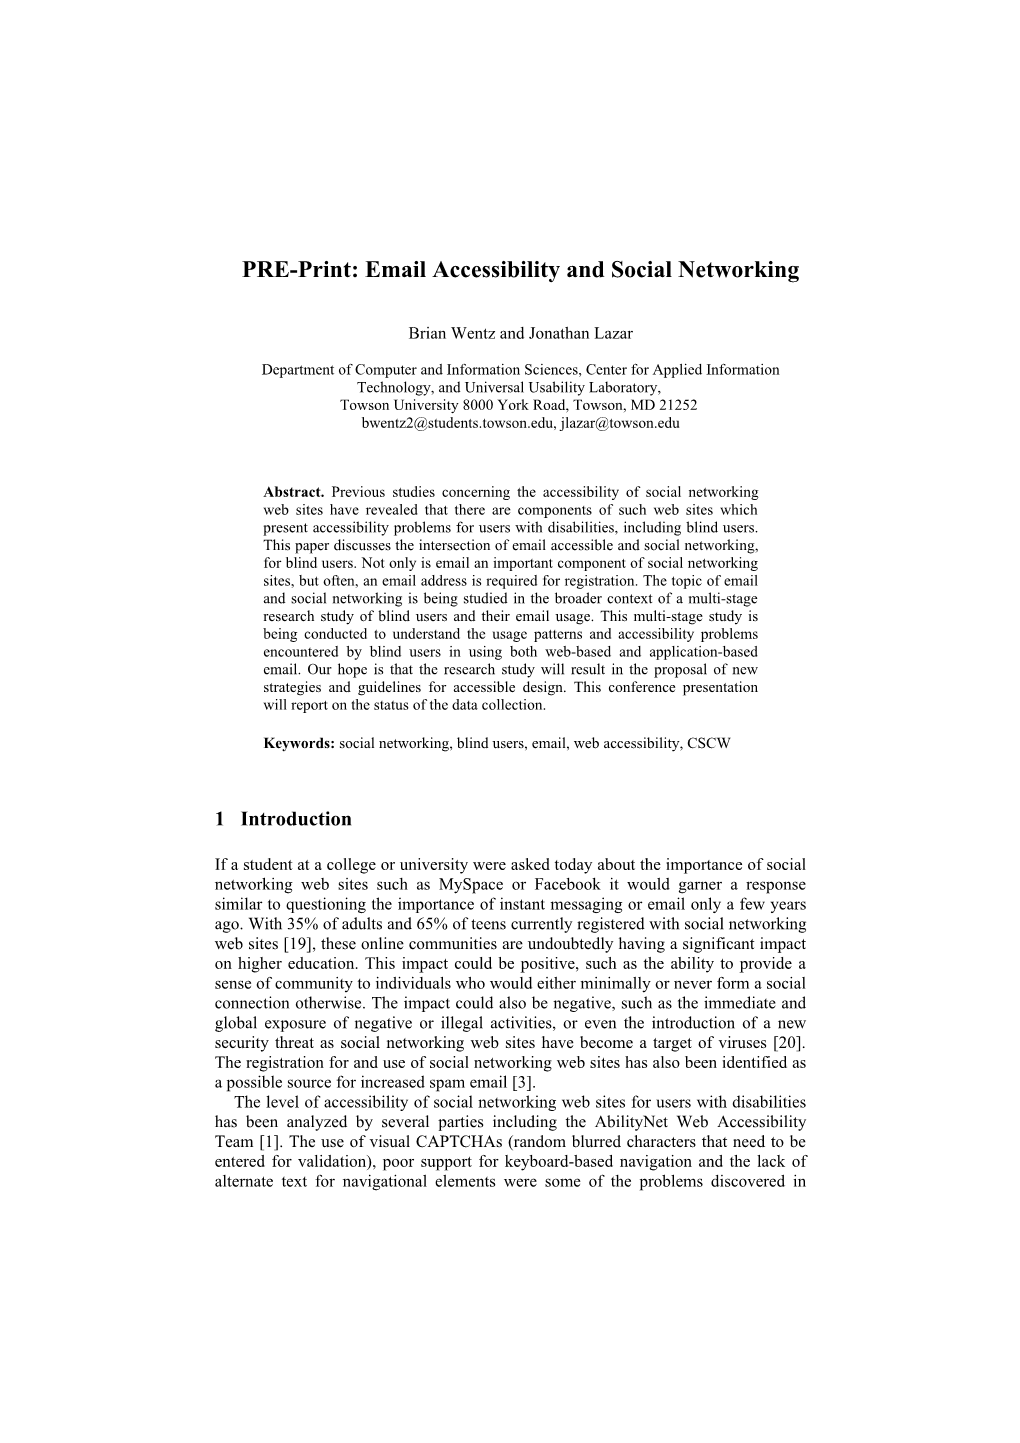 Email Accessibility and Social Networking